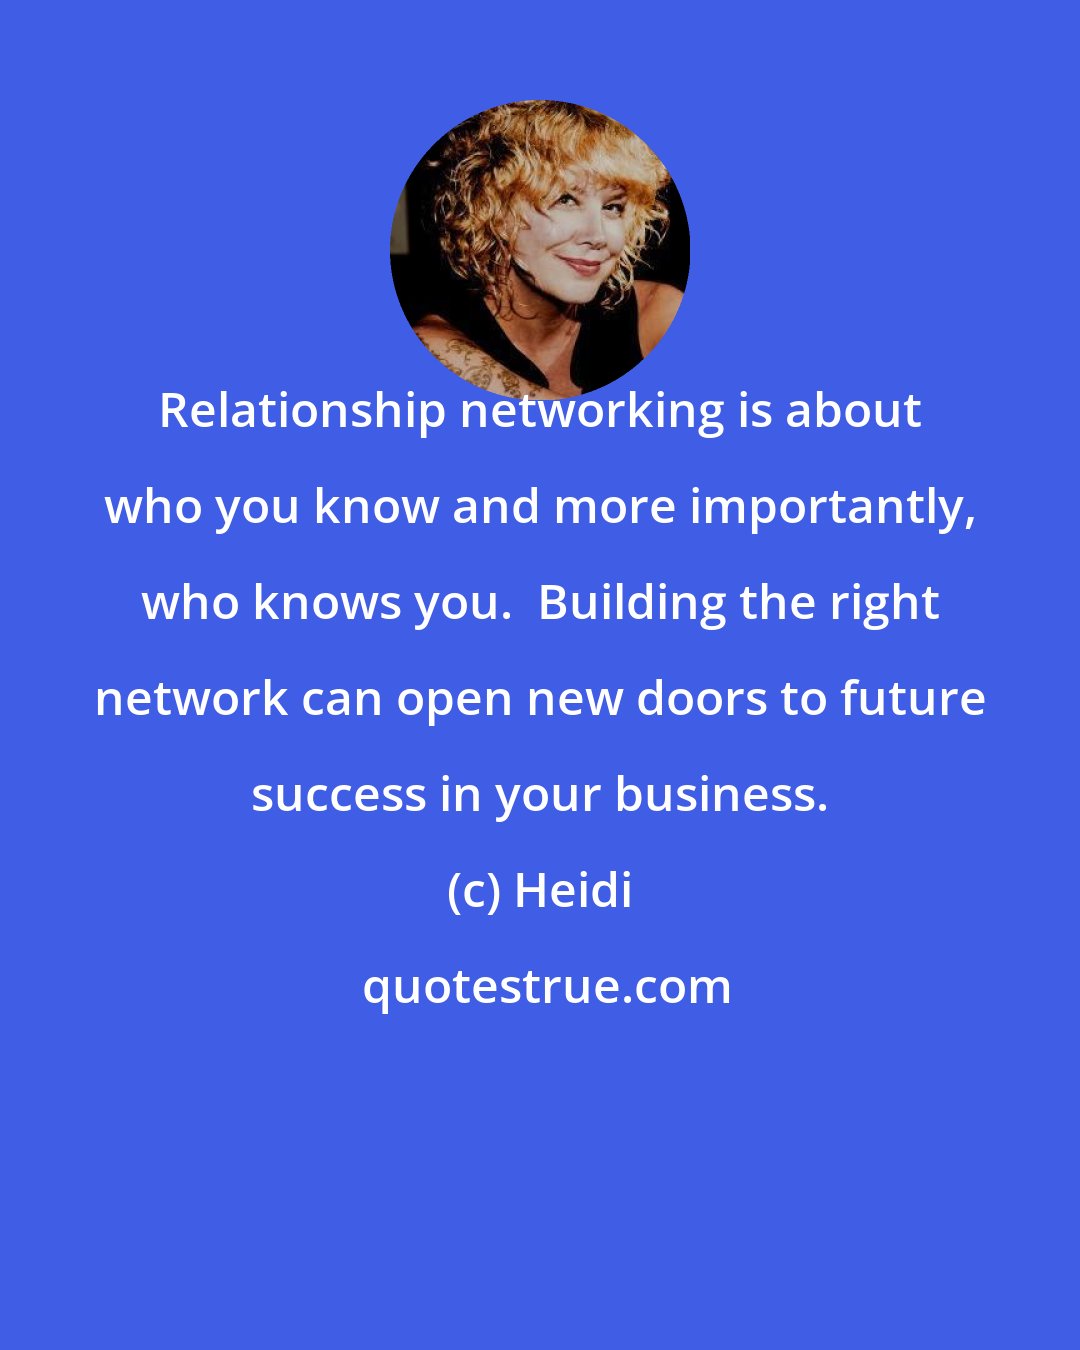 Heidi: Relationship networking is about who you know and more importantly, who knows you.  Building the right network can open new doors to future success in your business.